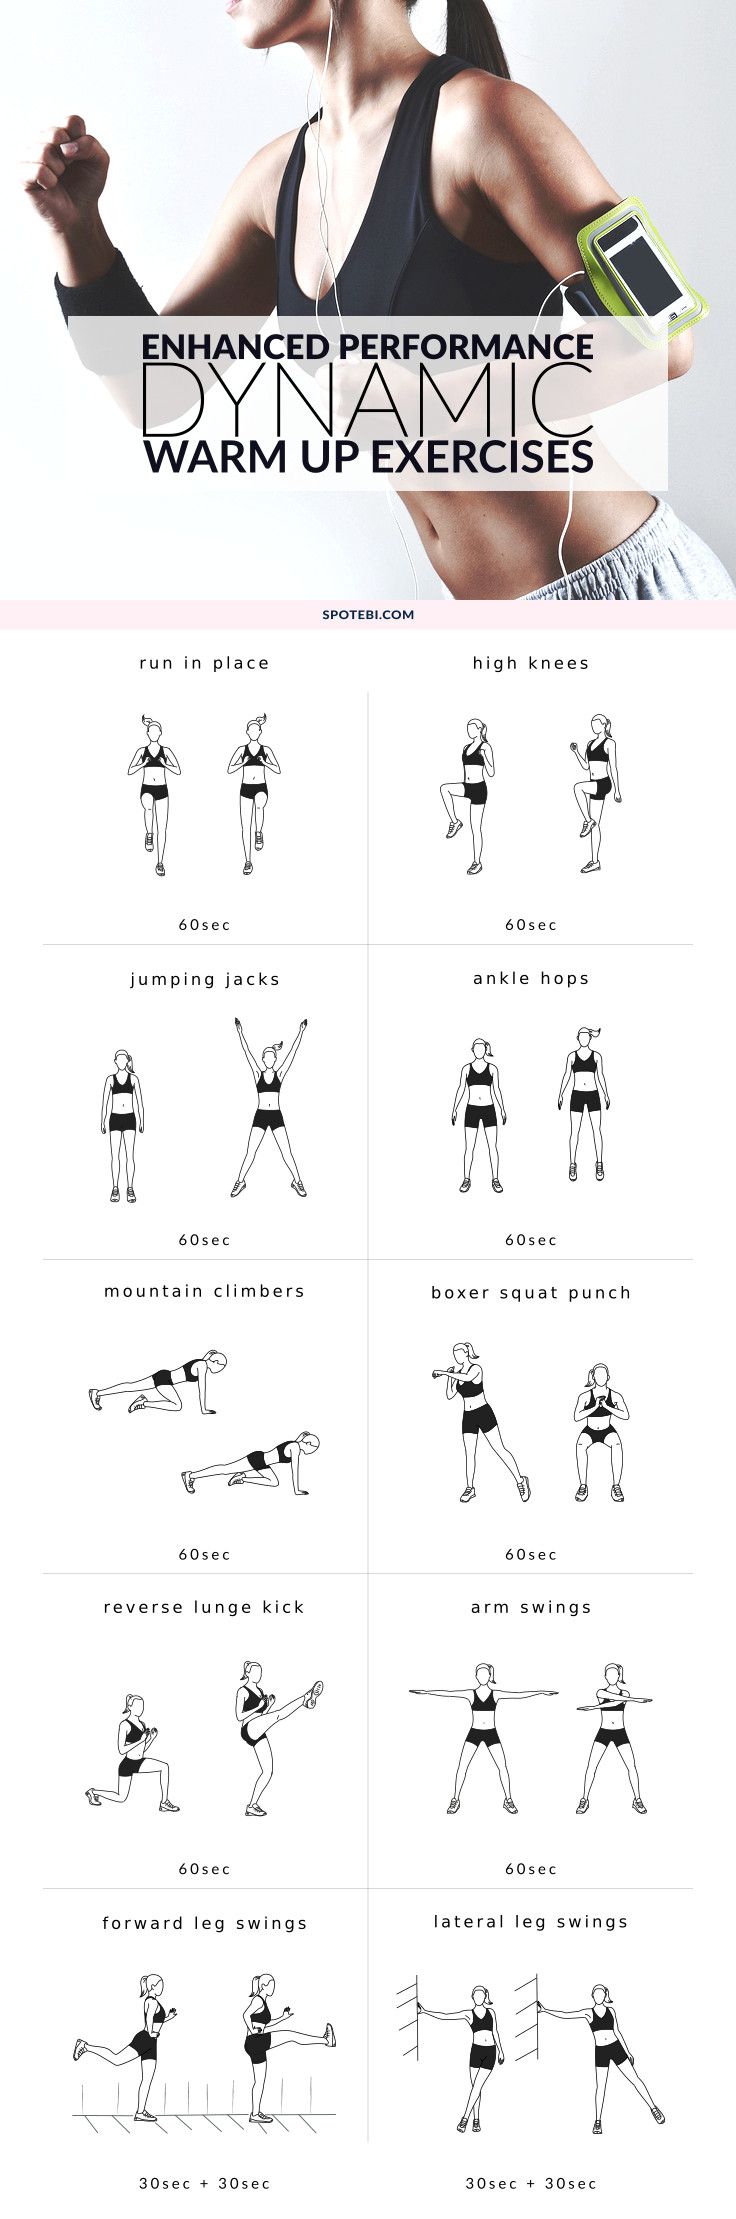 Fitness Motivation : Warm up your entire body at home with these ...